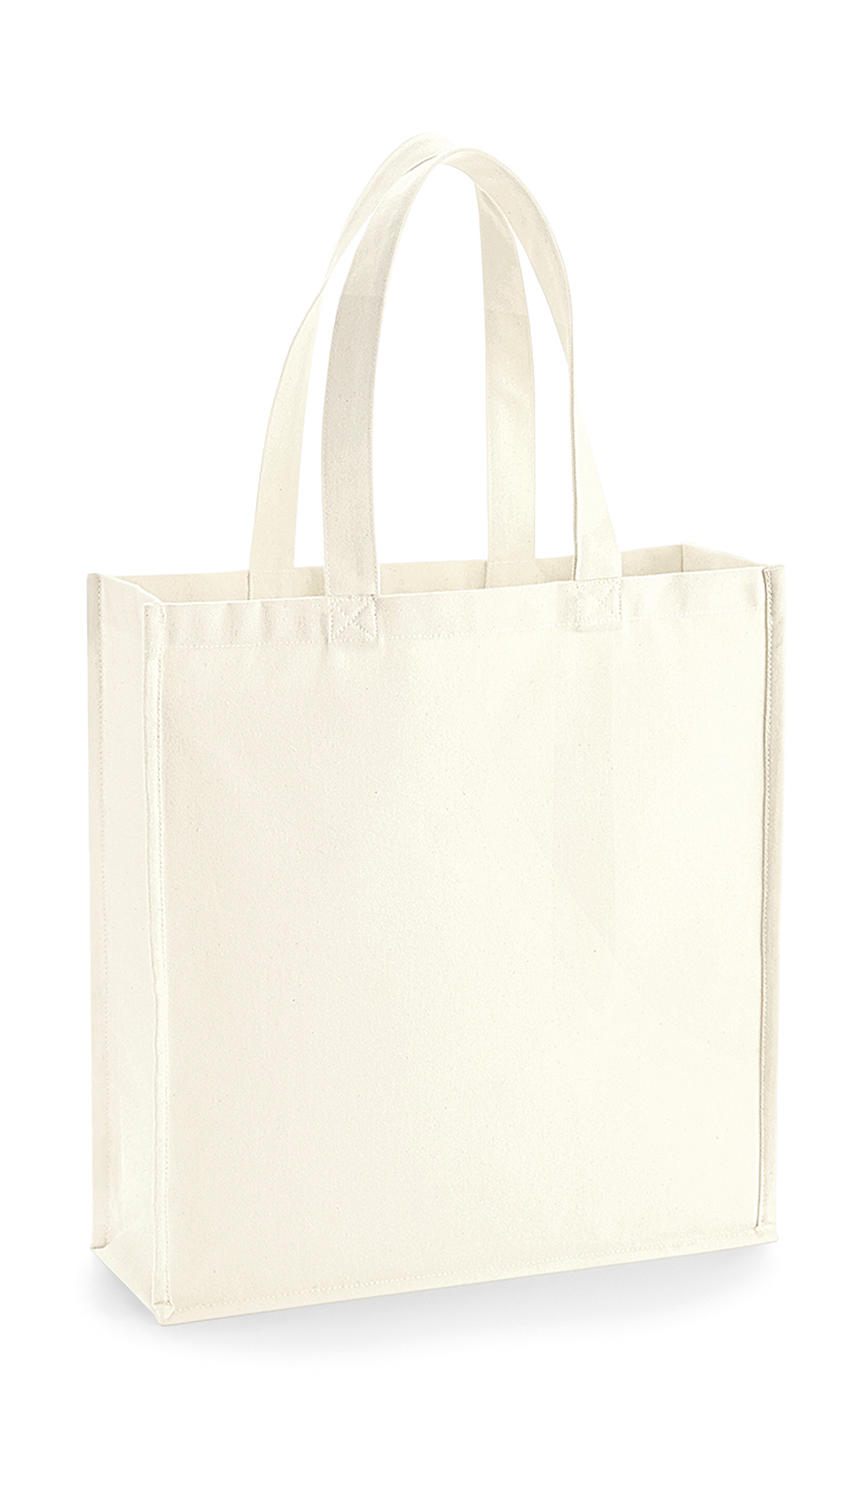  Gallery Canvas Tote in Farbe Natural